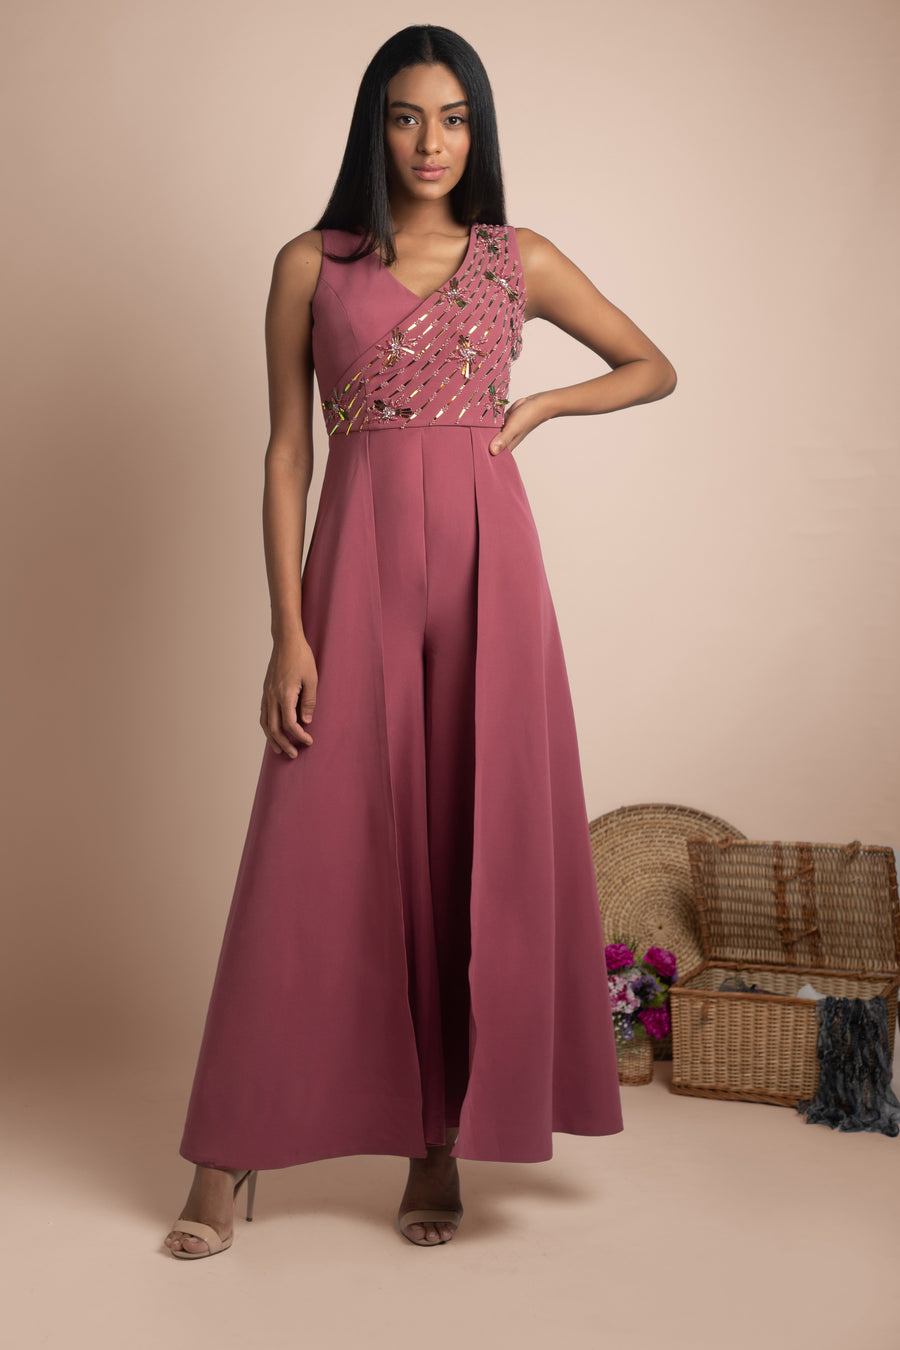 Mehak Murpana | Jumpsuit Gown | Stylish formal and party wear.